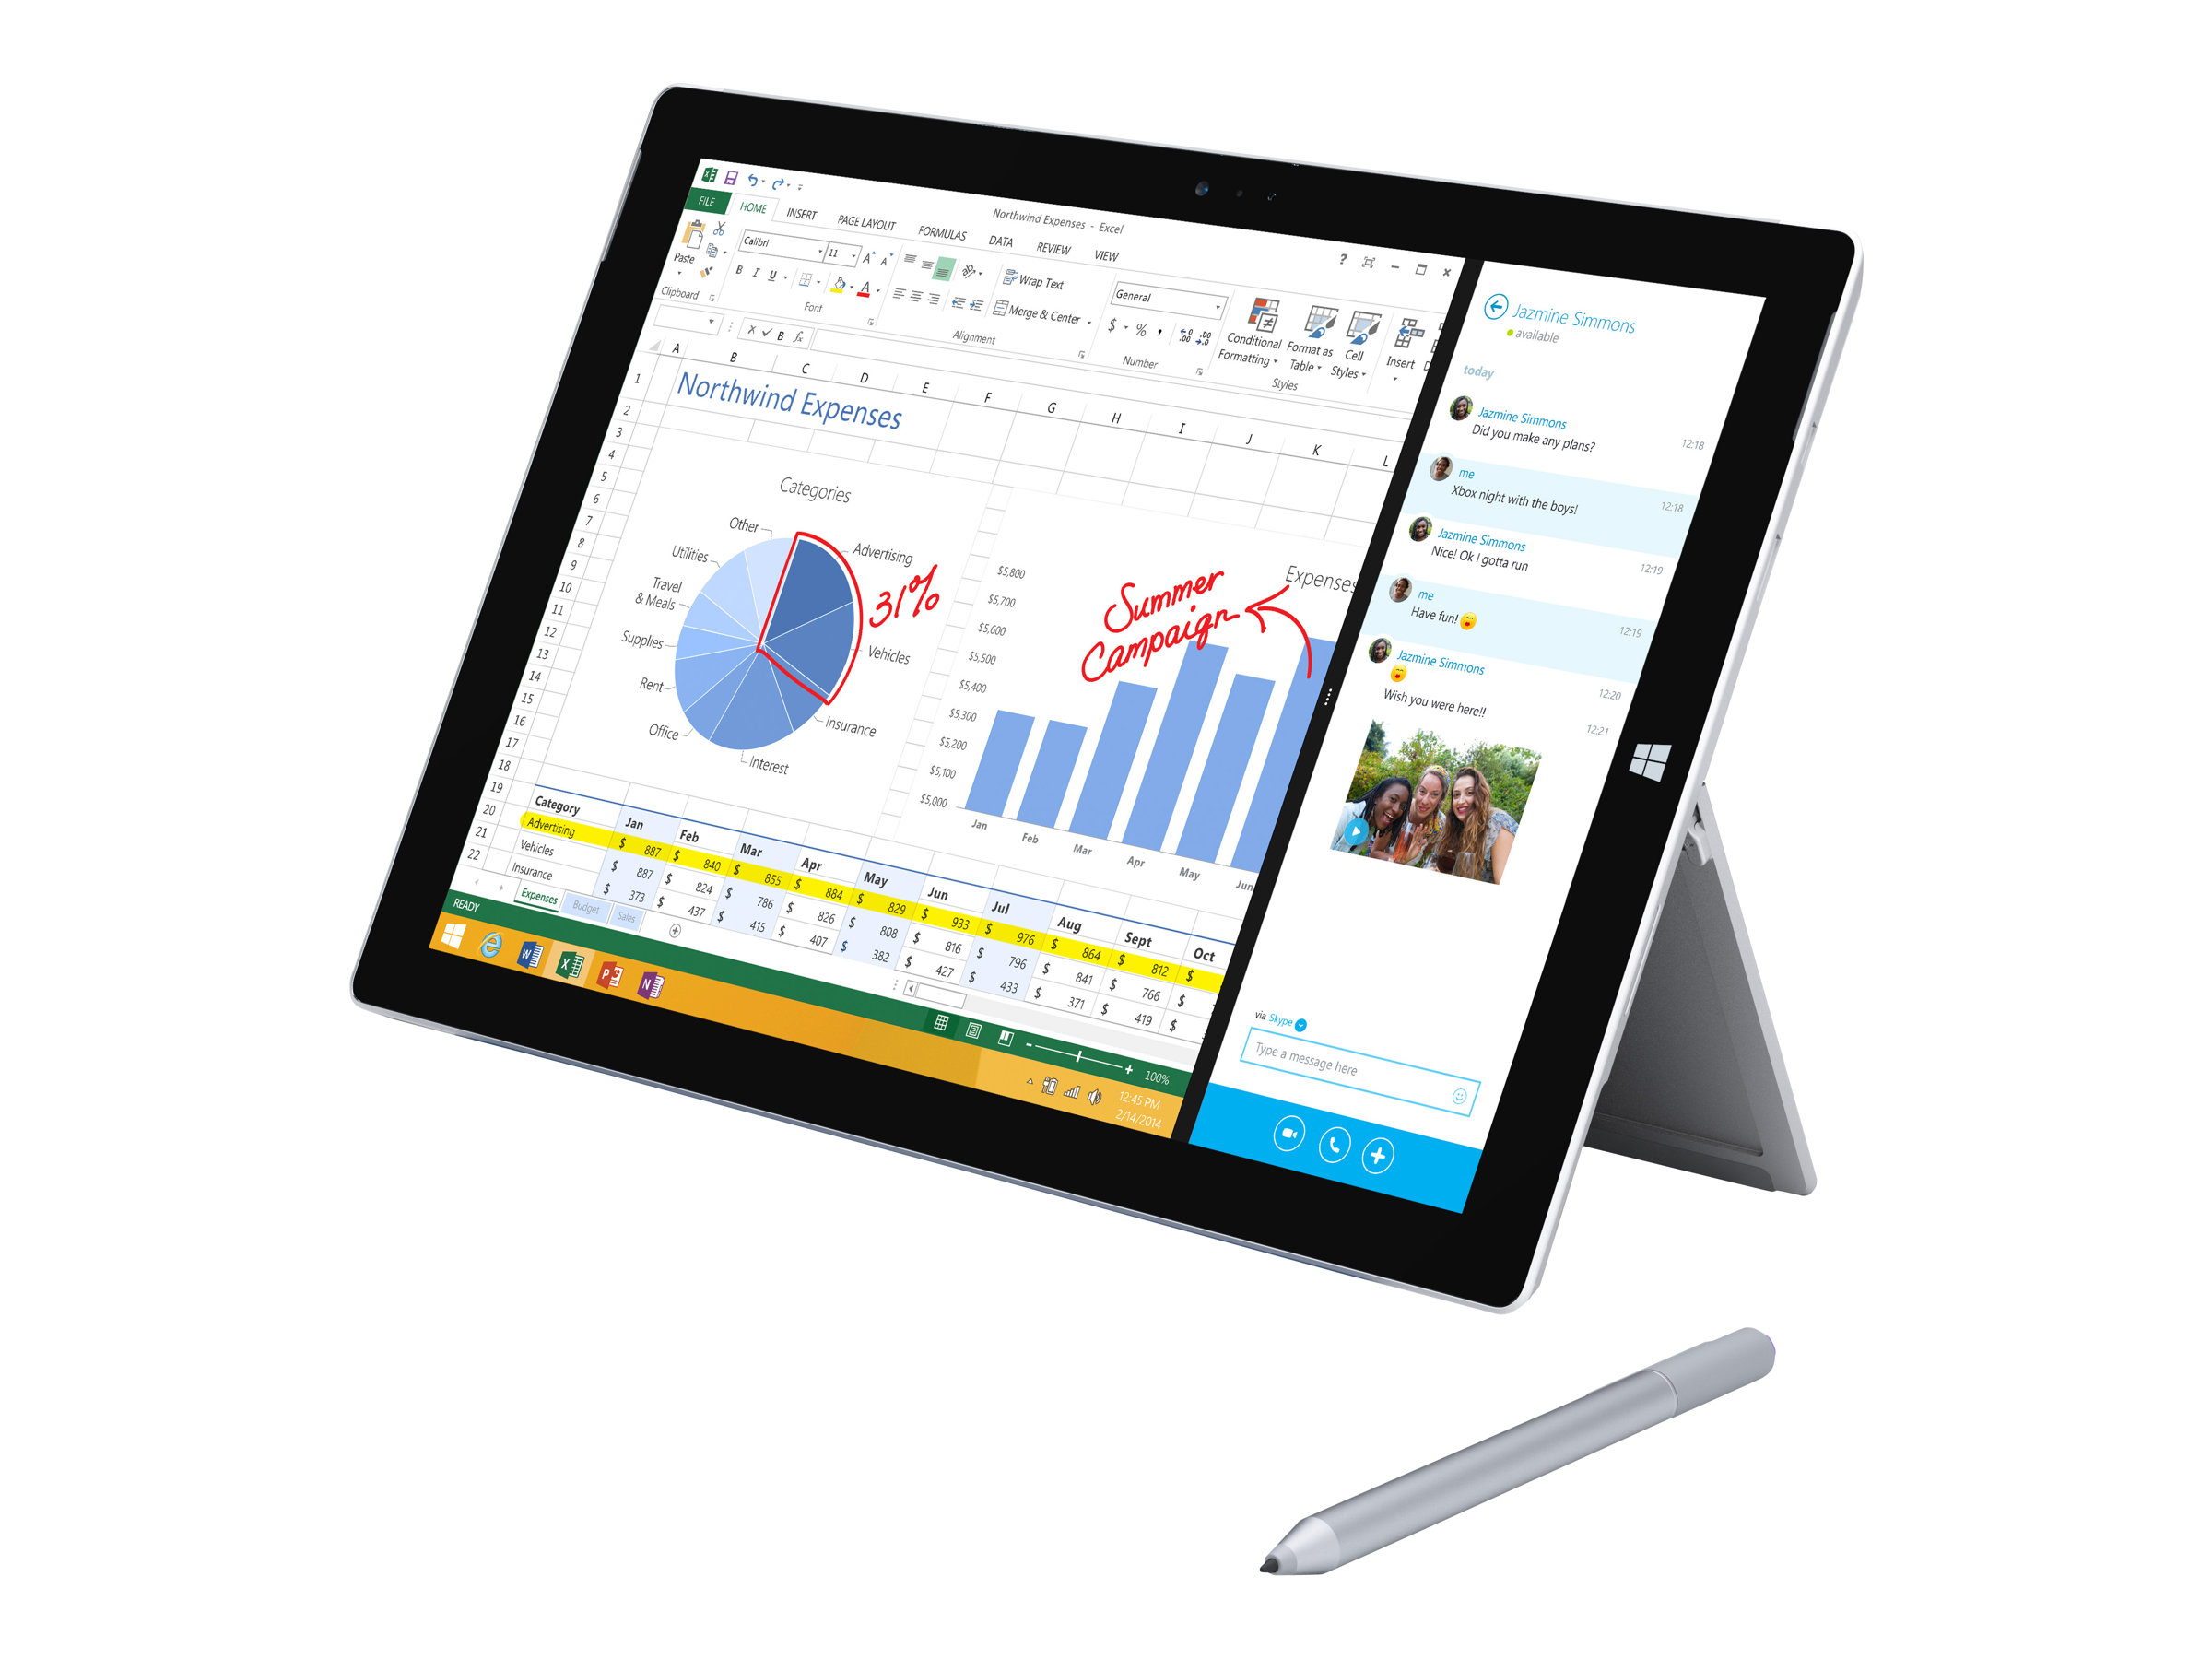 Microsoft- IMSourcing Surface Pro 3 Tablet, 12", 4 GB, 64 GB SSD, Windows 8.1 Pro, Silver - image 1 of 11